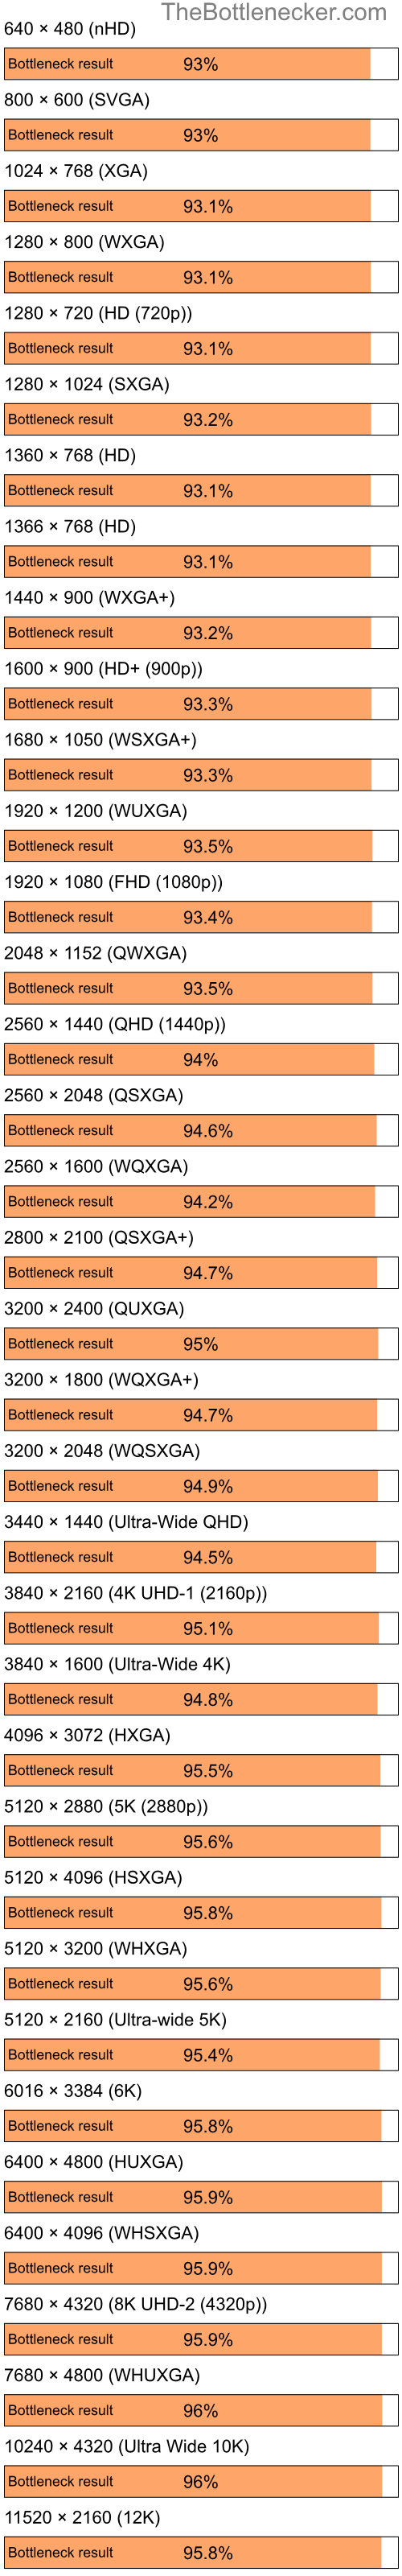 Bottleneck results by resolution for Intel Celeron M 410 and NVIDIA GeForce2 MX in Graphic Card Intense Tasks